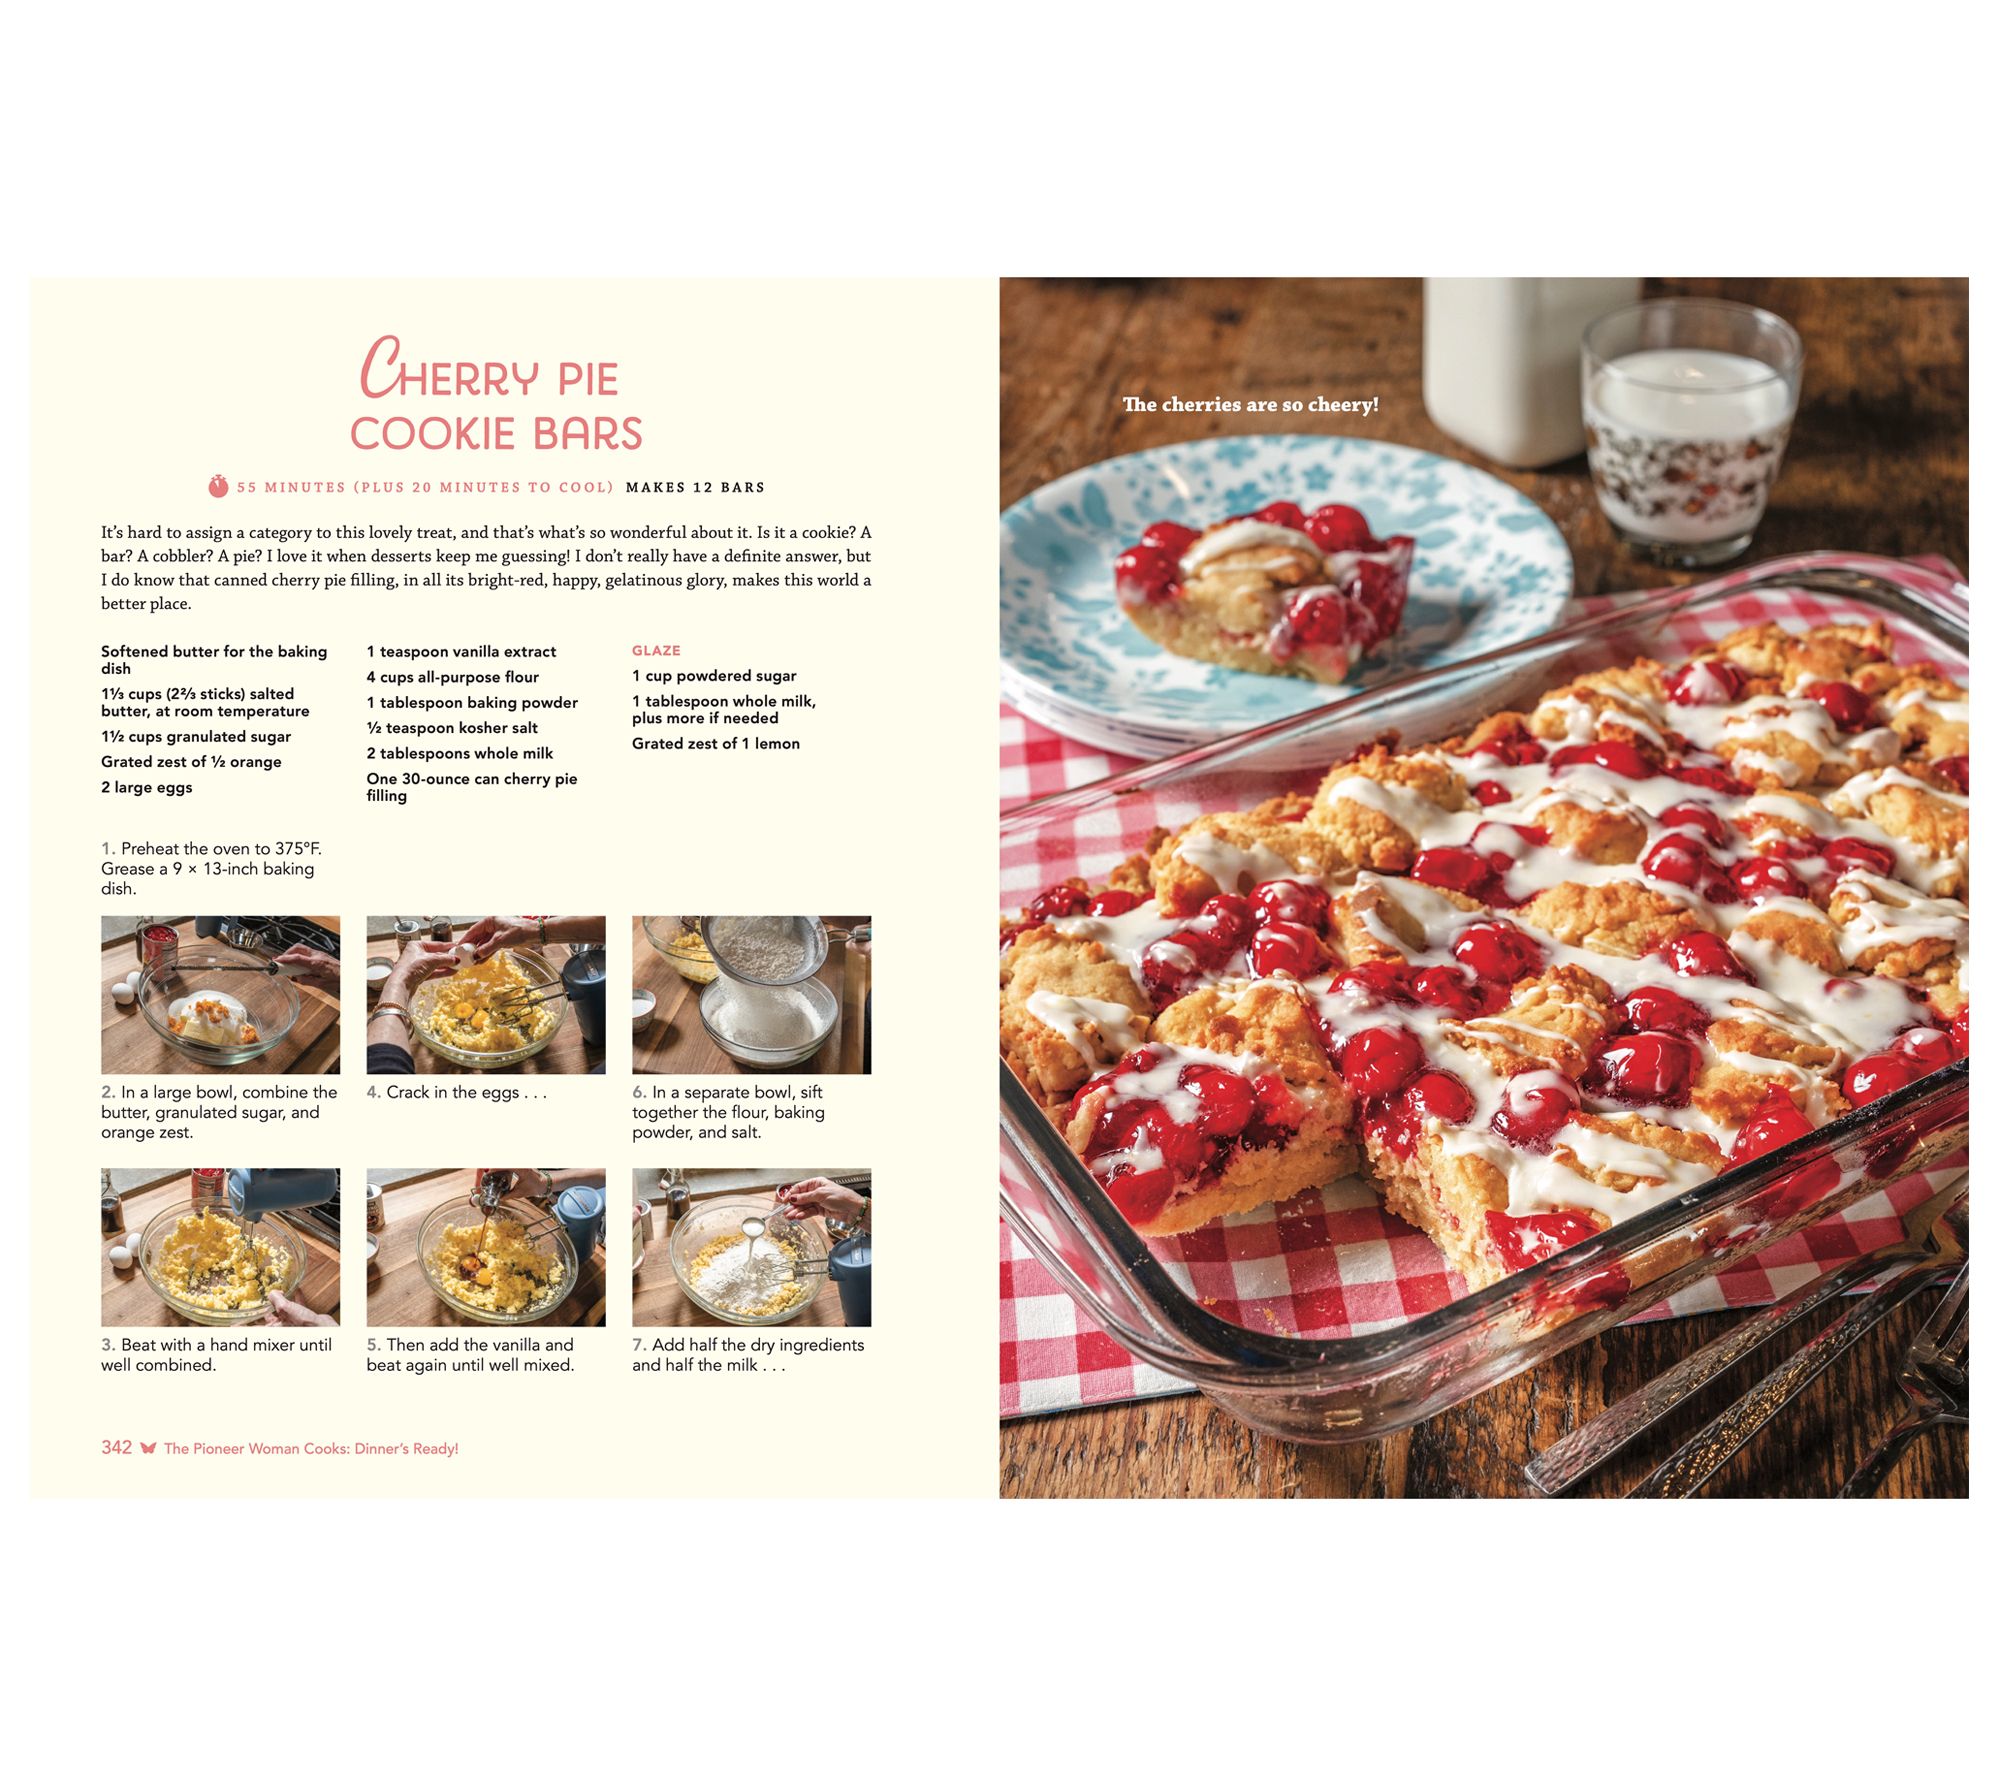 The Pioneer Woman Cooks: Super Easy! Cookbook - Where to Buy Ree Drummond's  New Cookbook